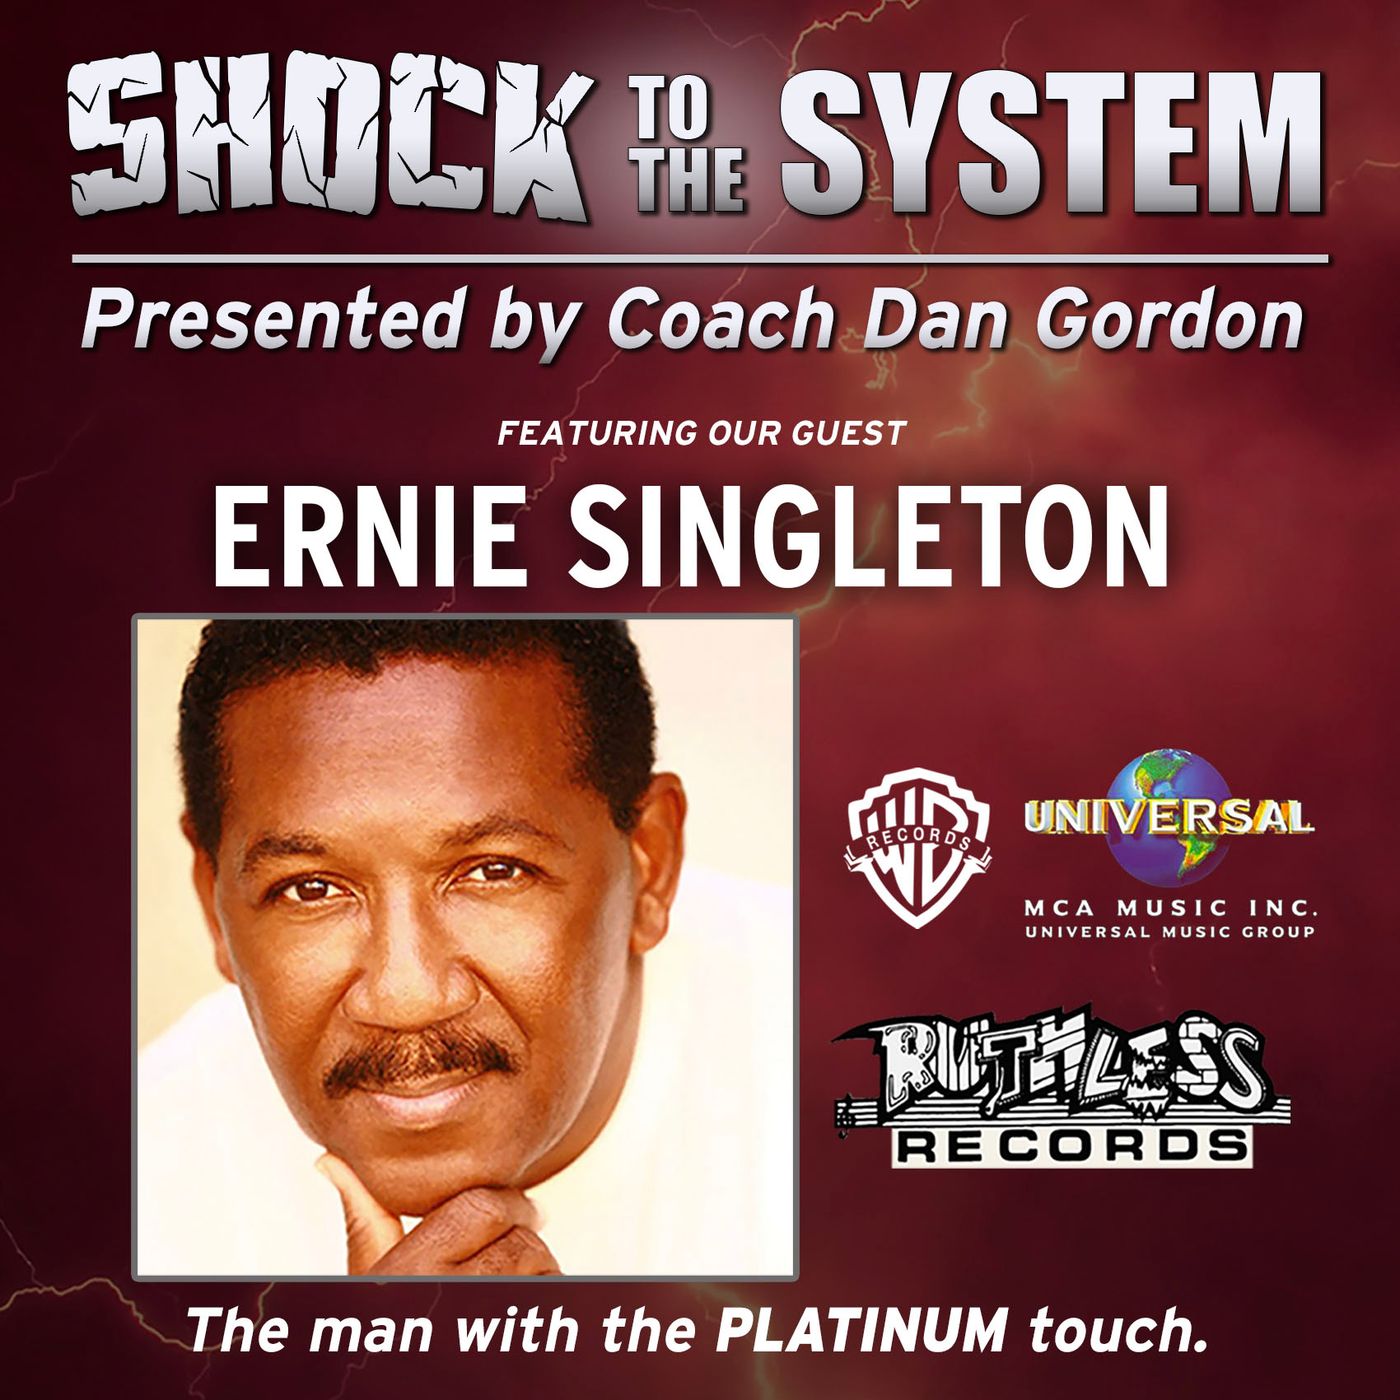 Ernie Singleton - The Man with the Platinum Touch on Shock to the System - with Coach Dan Gordon